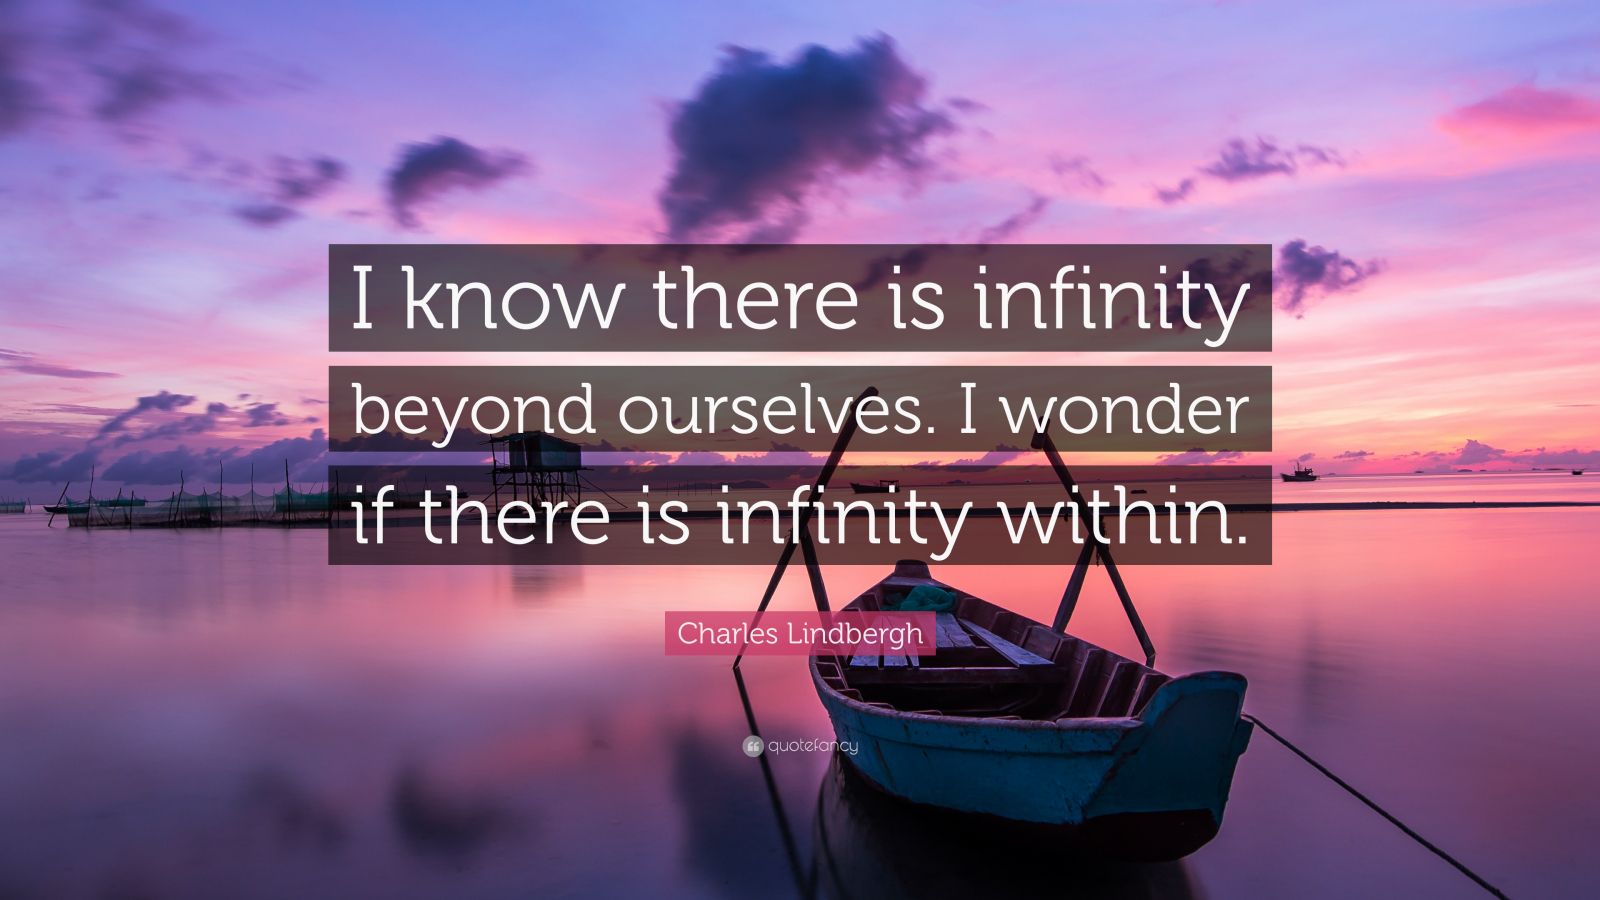 Charles Lindbergh Quote: "I know there is infinity beyond ourselves. I wonder if there is ...